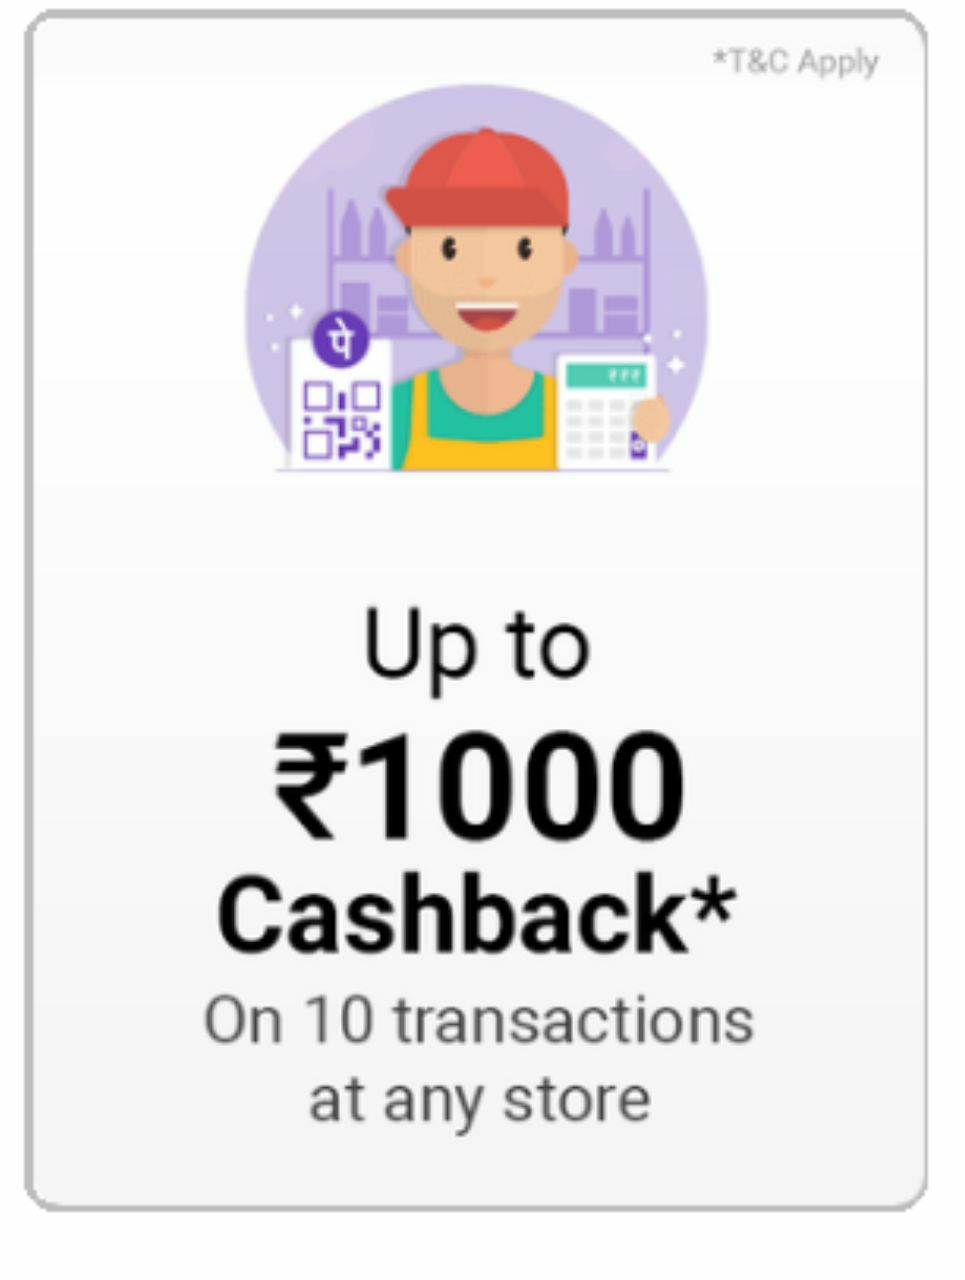 Phonepe Offer Today, phonepe offers jio,phonepe offers petrol,phonepe offers mother dairy,flipkart phonepe offer today,phone pe offer 2019,phone pe jio offer 399,phonepe upcoming offers